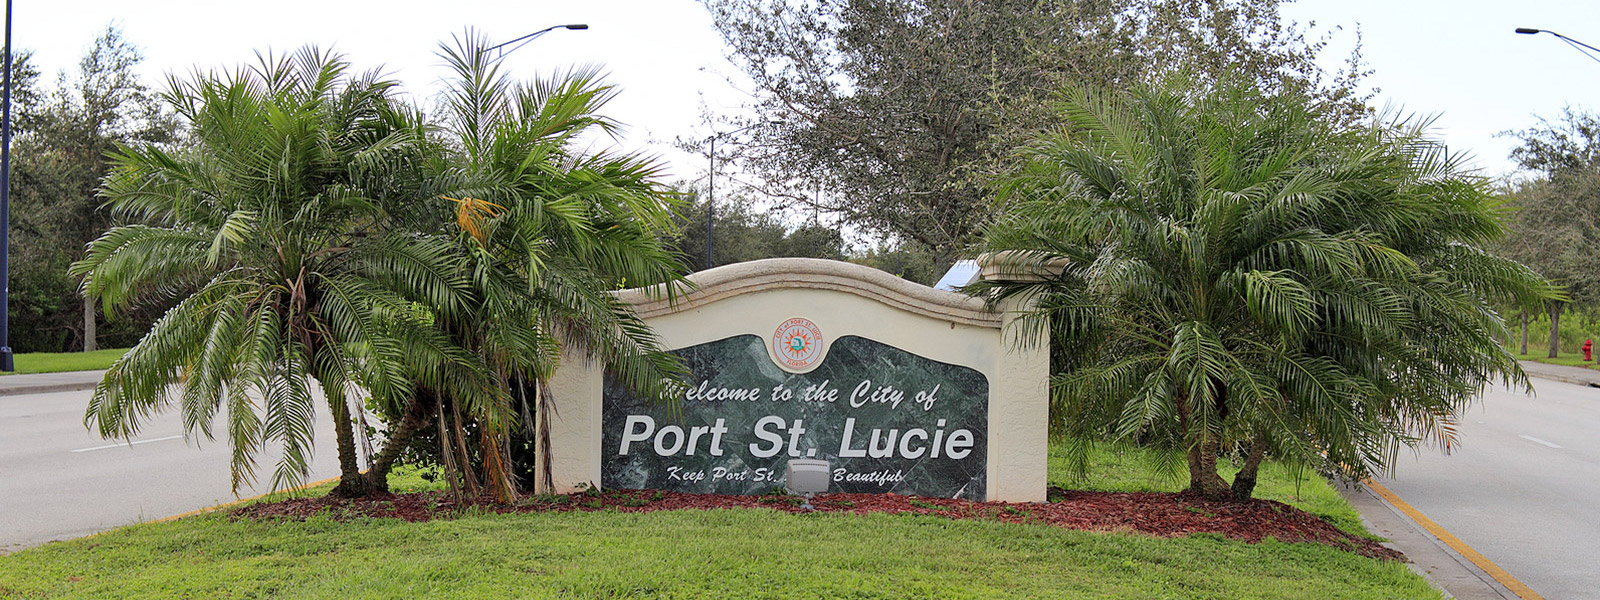 water purification company in port st. lucie fl